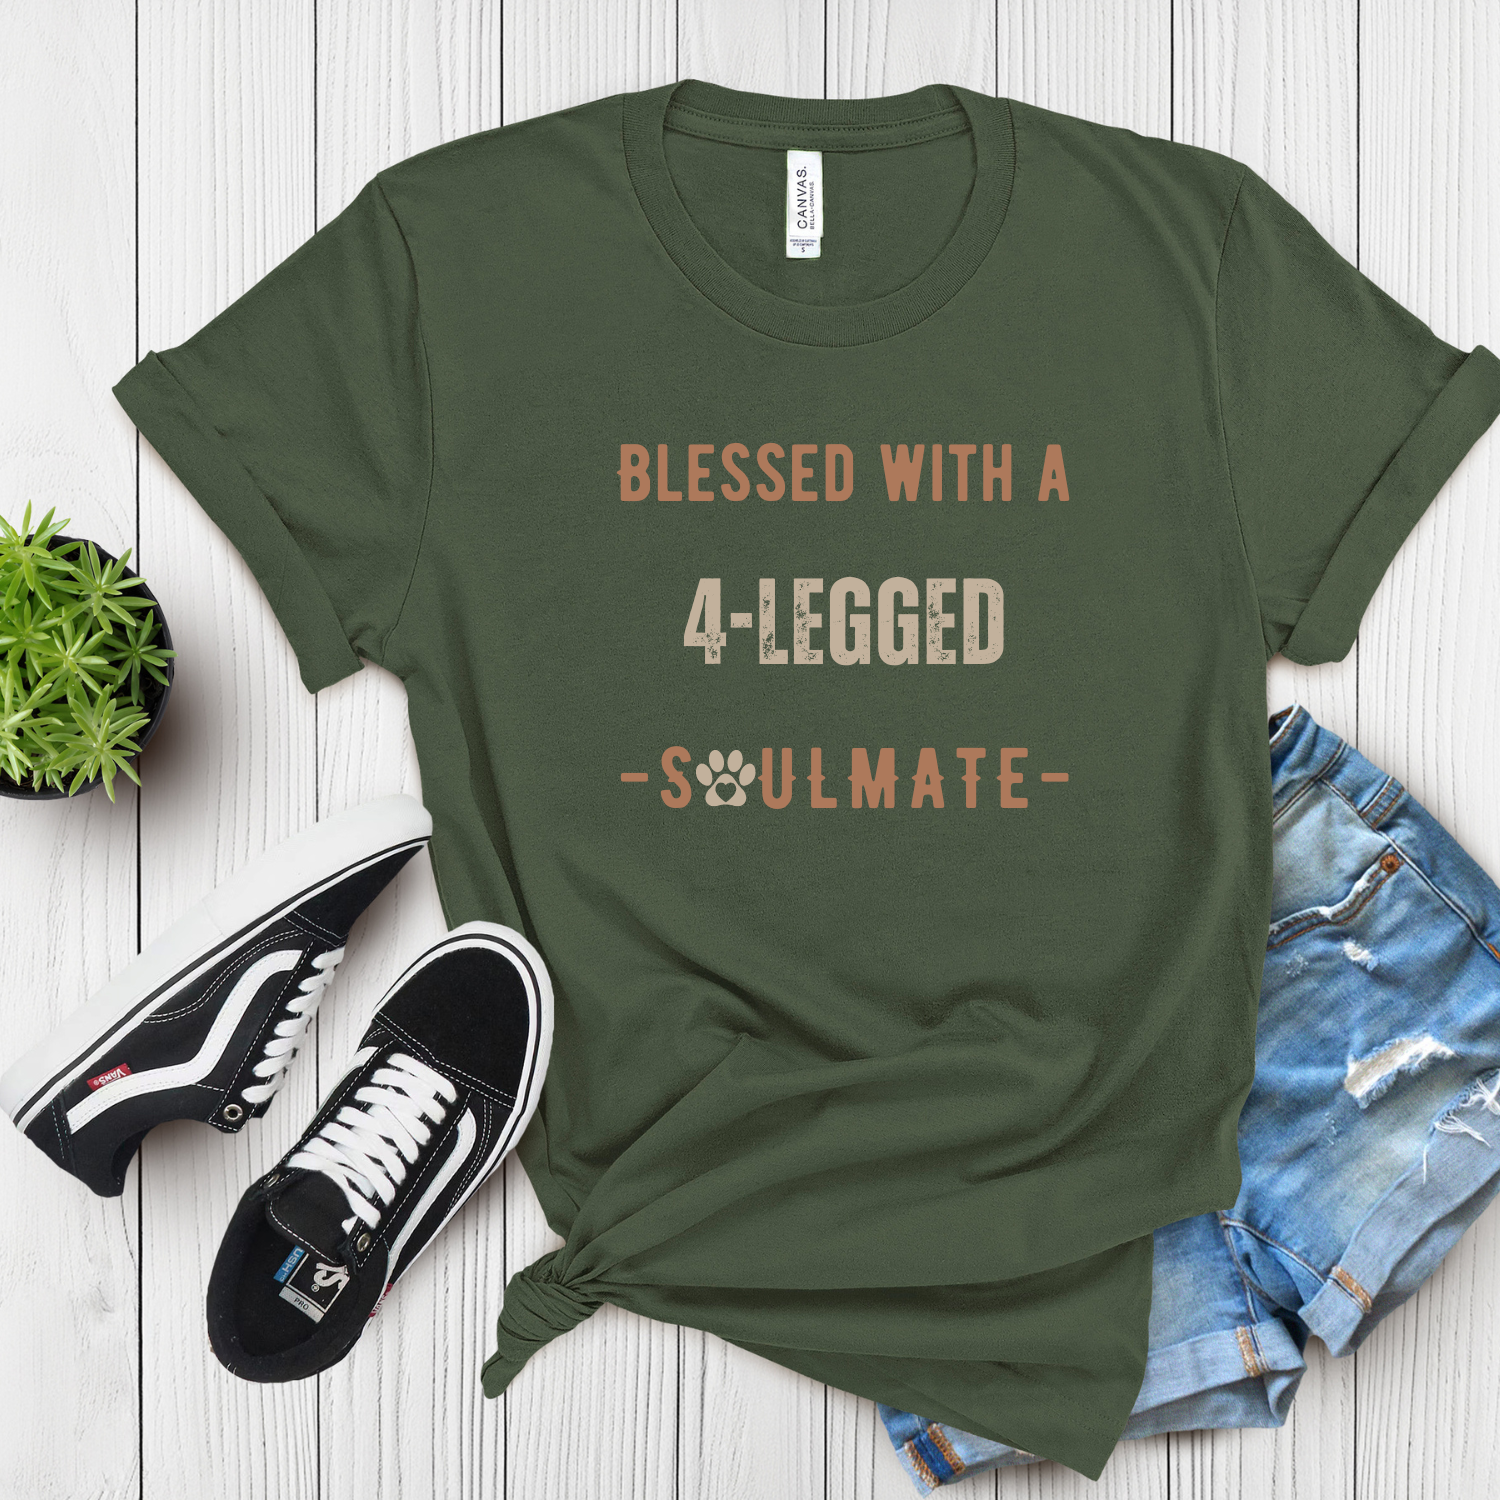 Military green 4-legged soulmate t-shirt for any dog lover. 